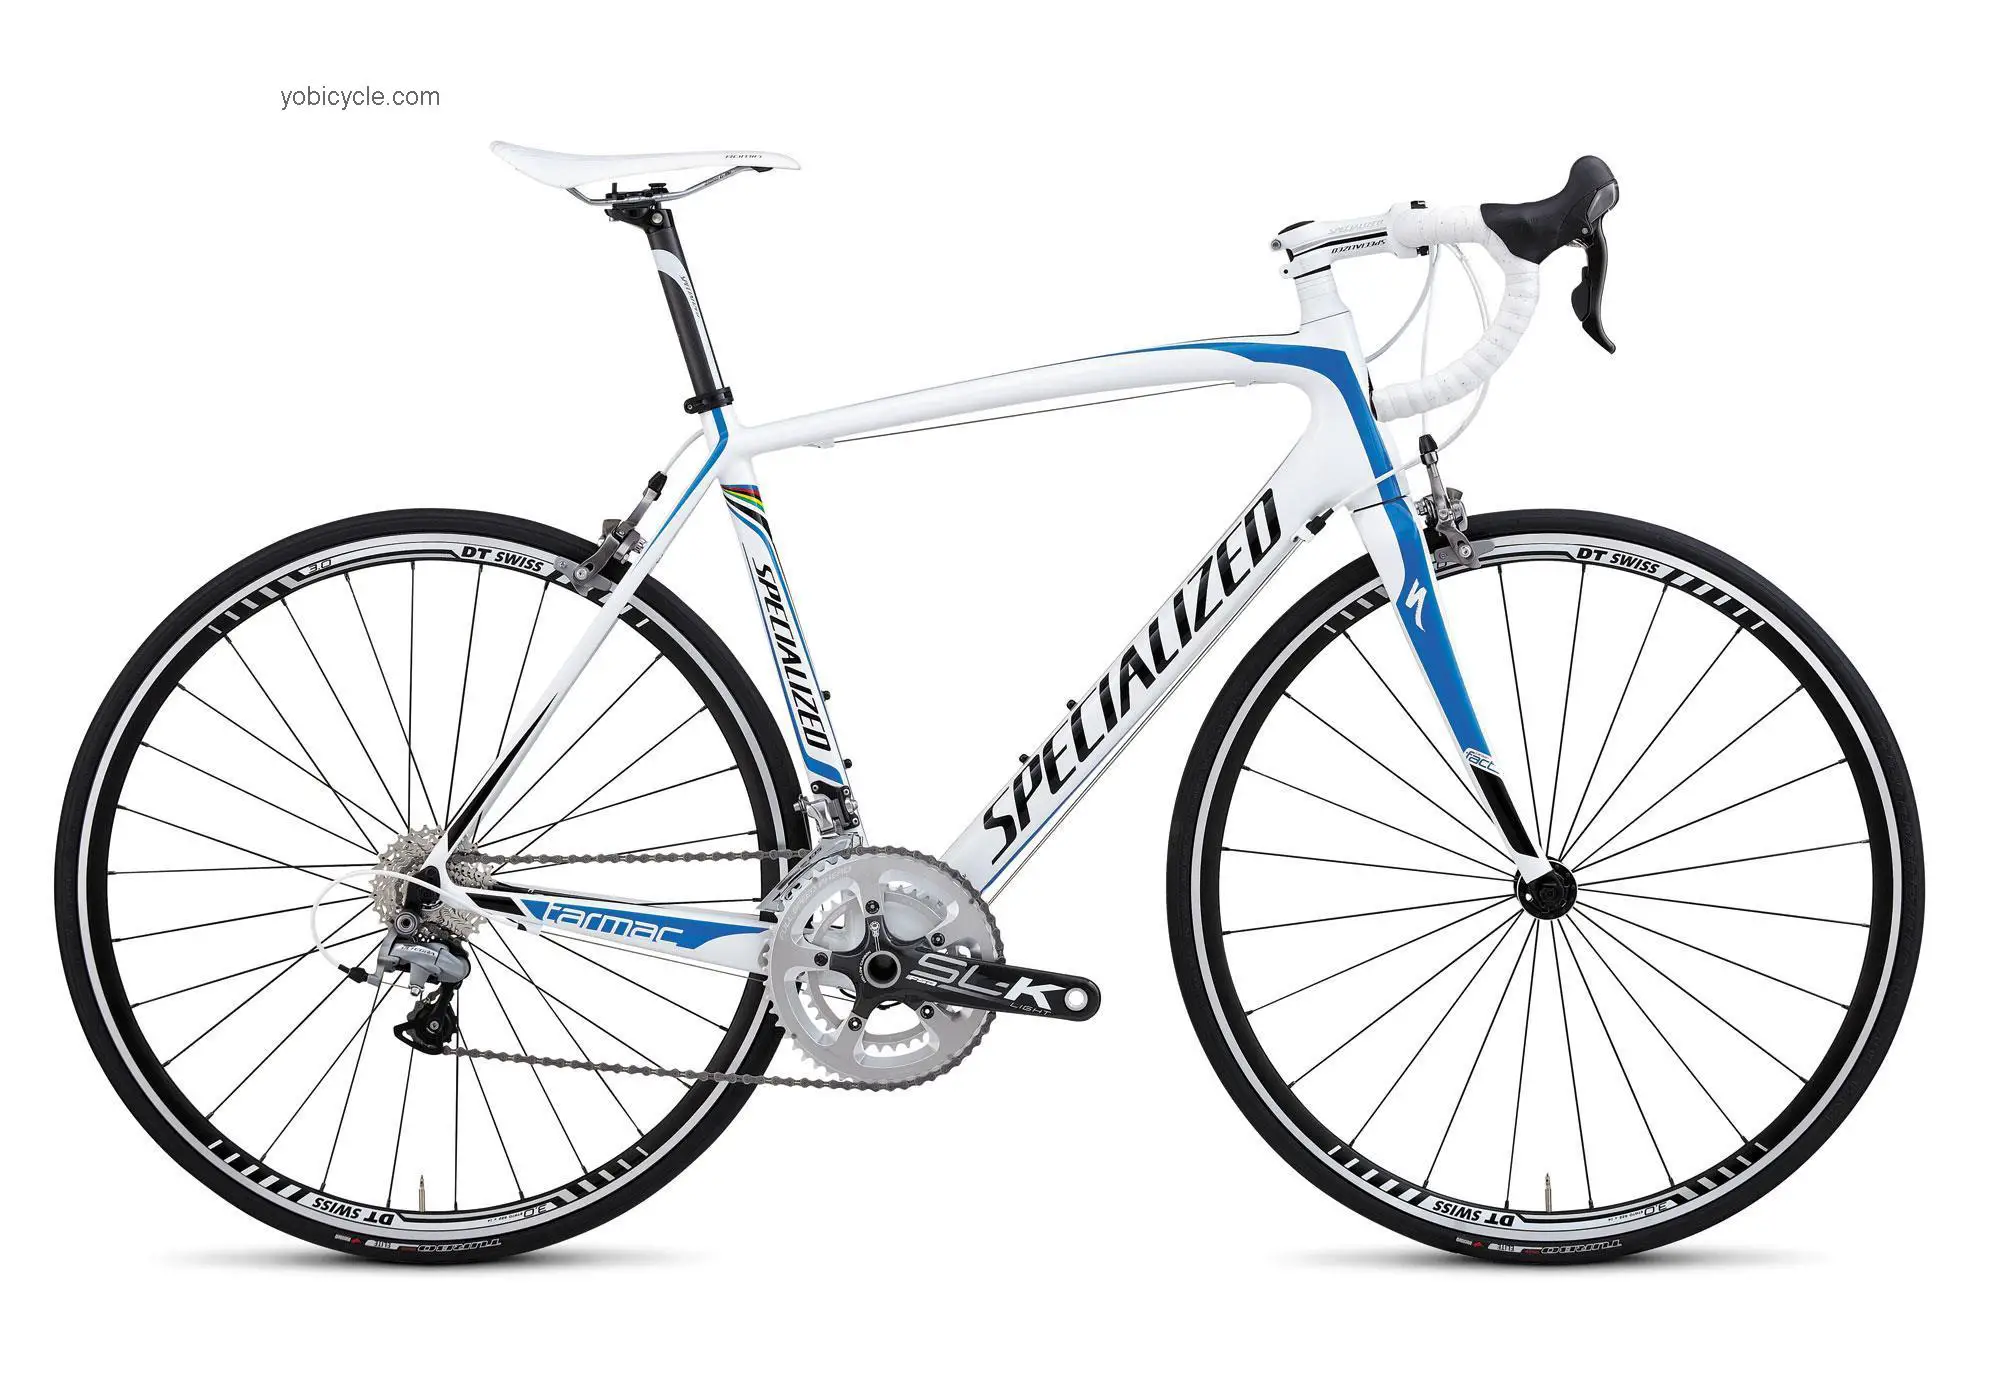 Specialized Tarmac Comp M2 2012 comparison online with competitors